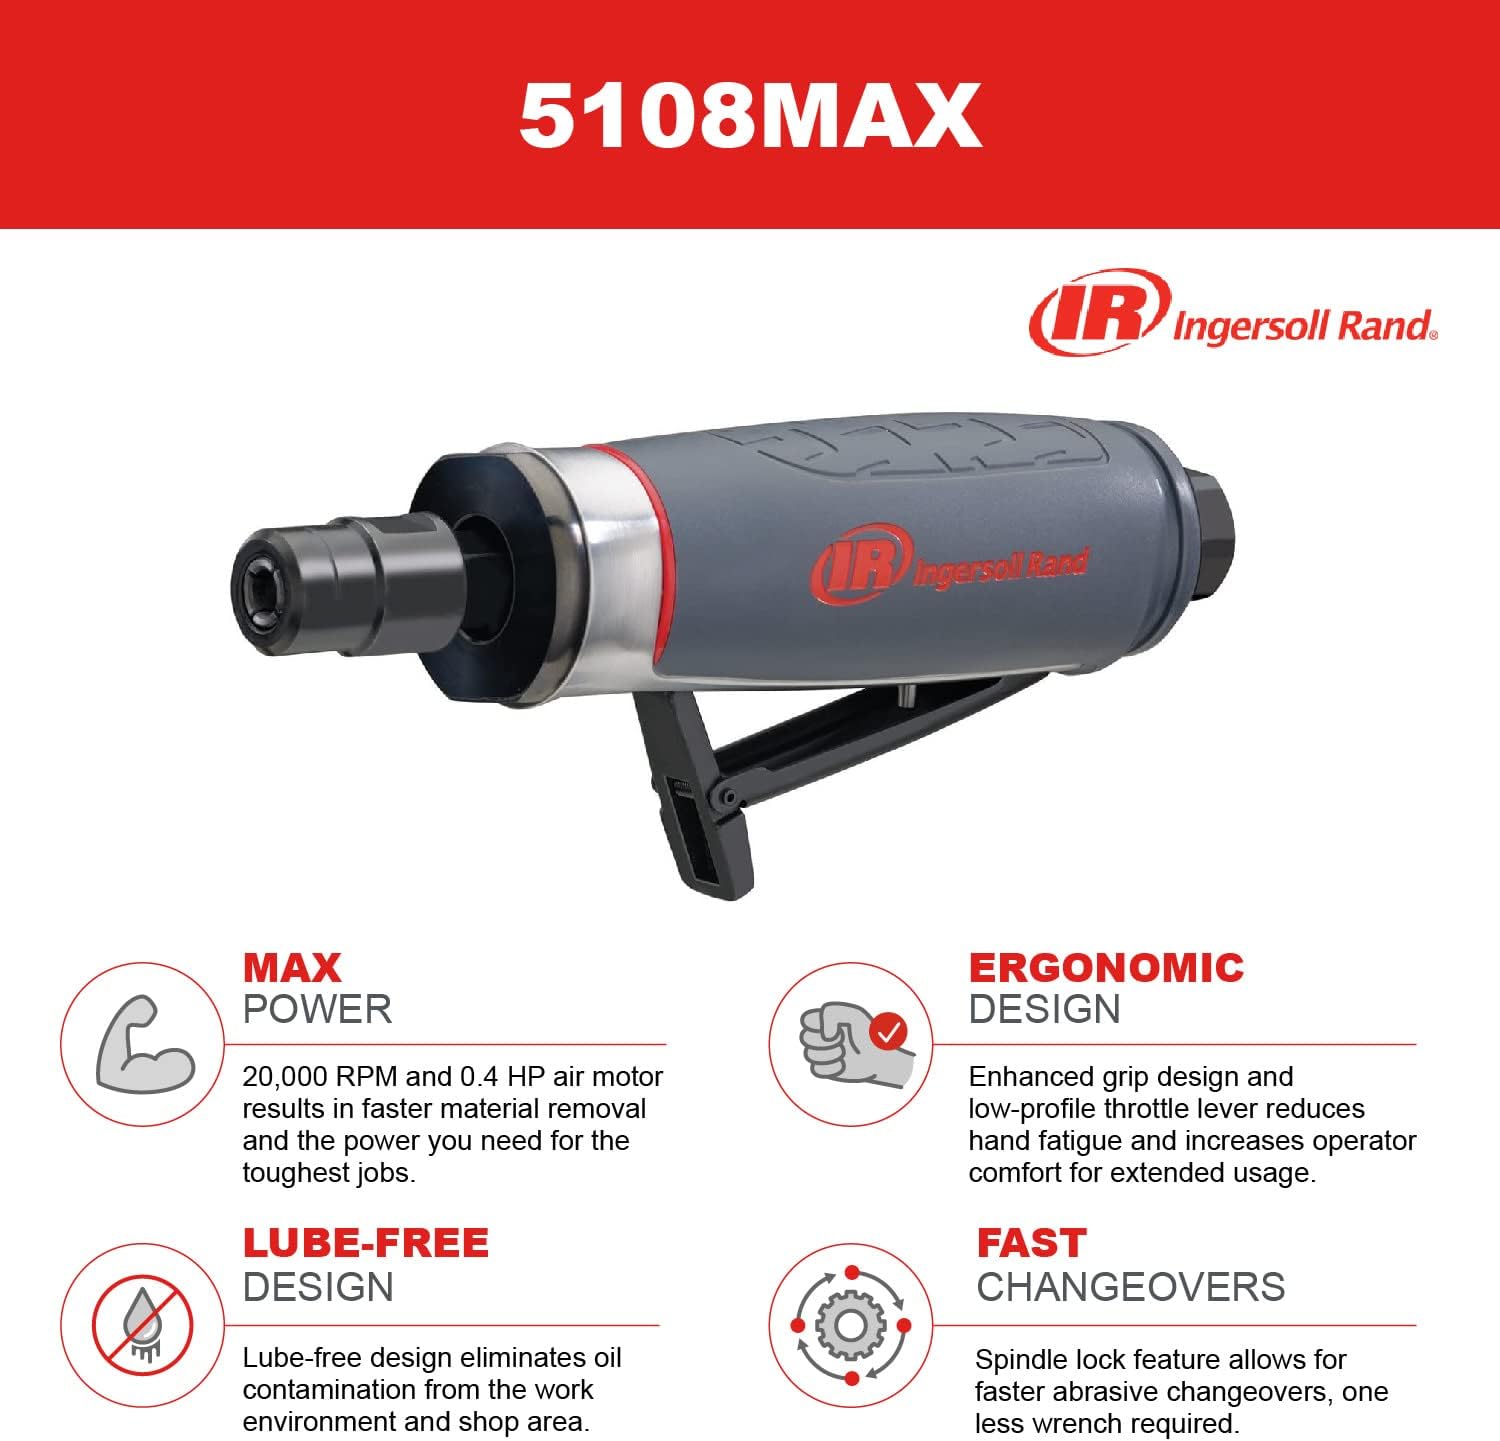 Ingersoll Rand 5102MAX Air Die Grinder – Right Angle, Ergonomic Grip, 0.4 HP and 20,000 RPM Motor, Lightweight Tool, Spindle Lock, Grey